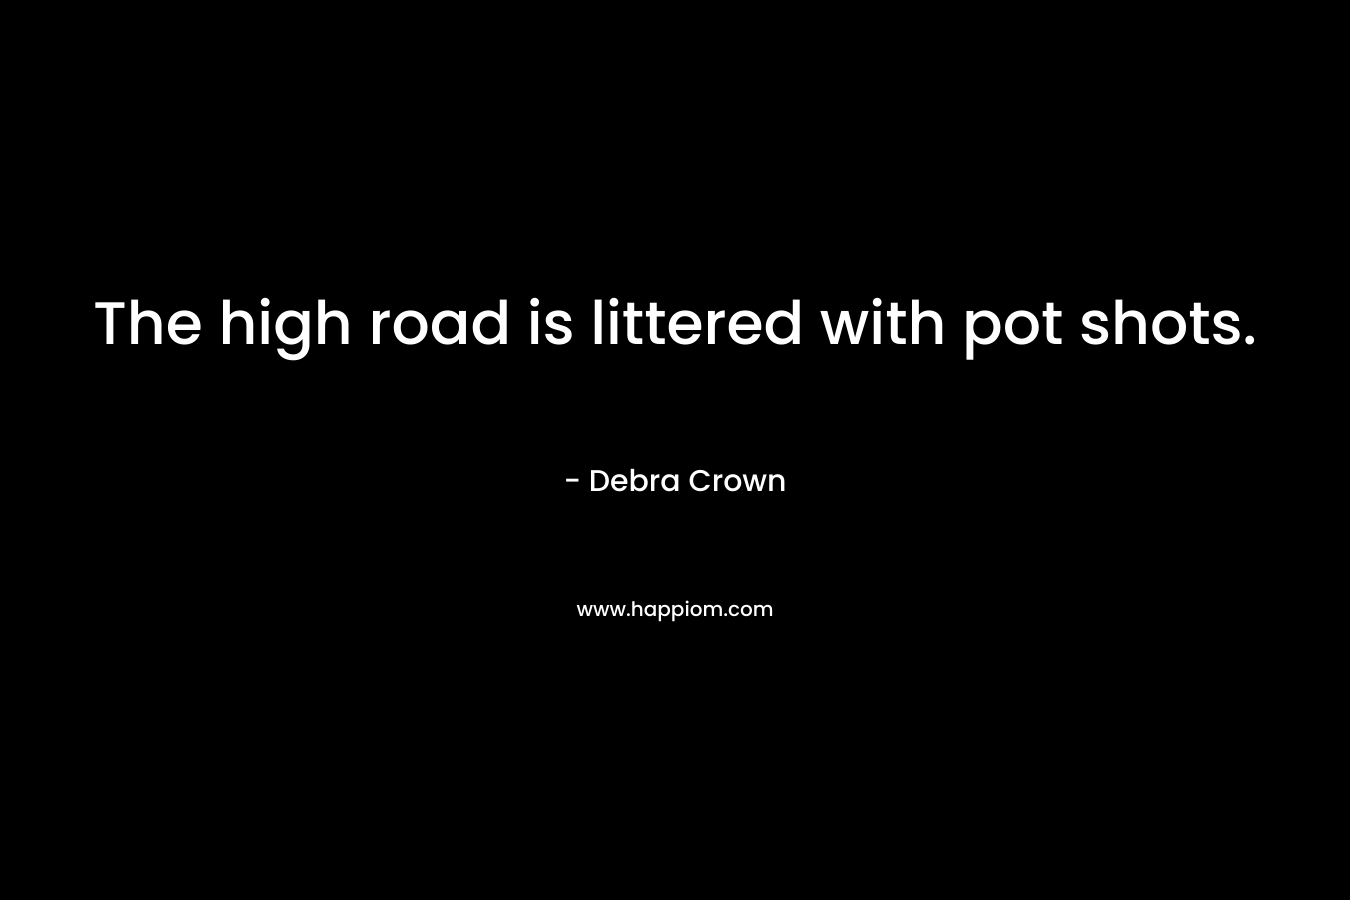 The high road is littered with pot shots. – Debra Crown